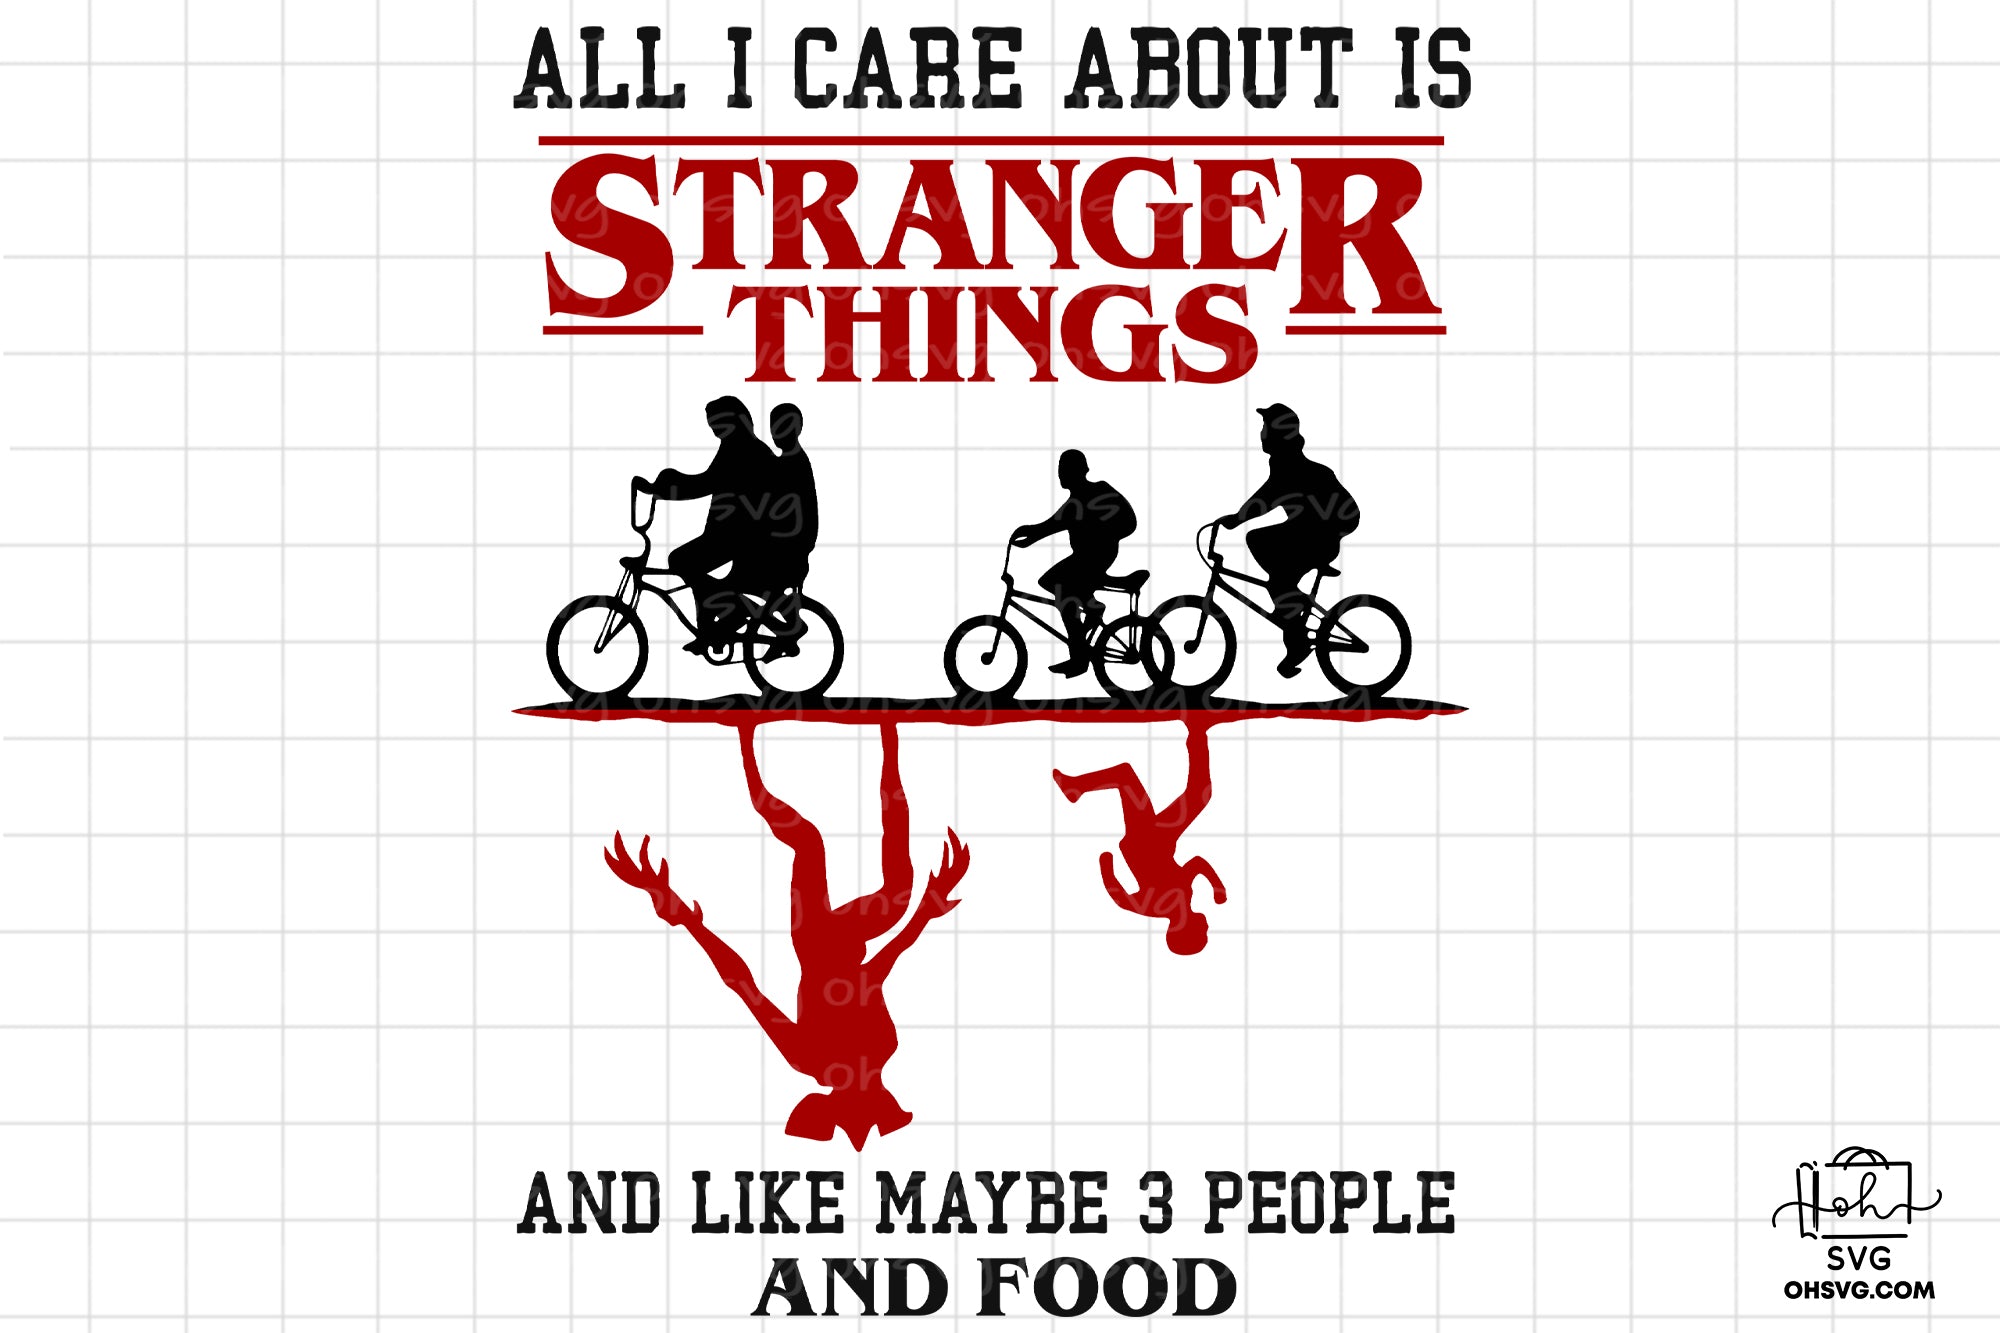 All I Care About Is Stranger Things PNG, Stranger Things PNG, Science Fiction Movie PNG